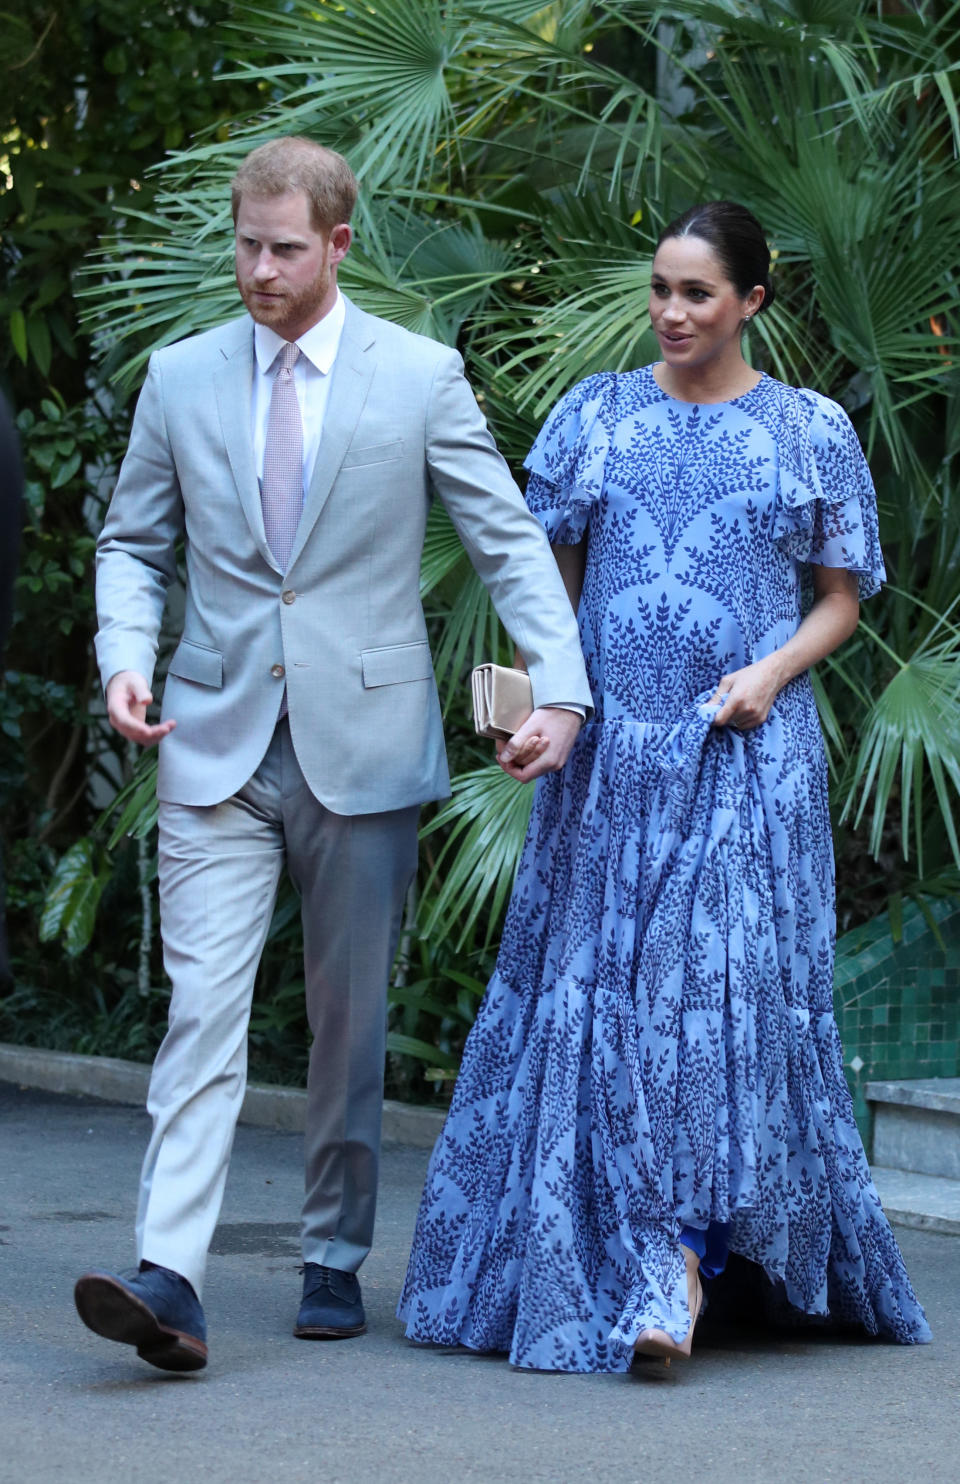 The Duke and Duchess of Sussex leave the residence of the the King of Morocco in Rabat, following an audience with him, on the third day of their tour of Morocco.